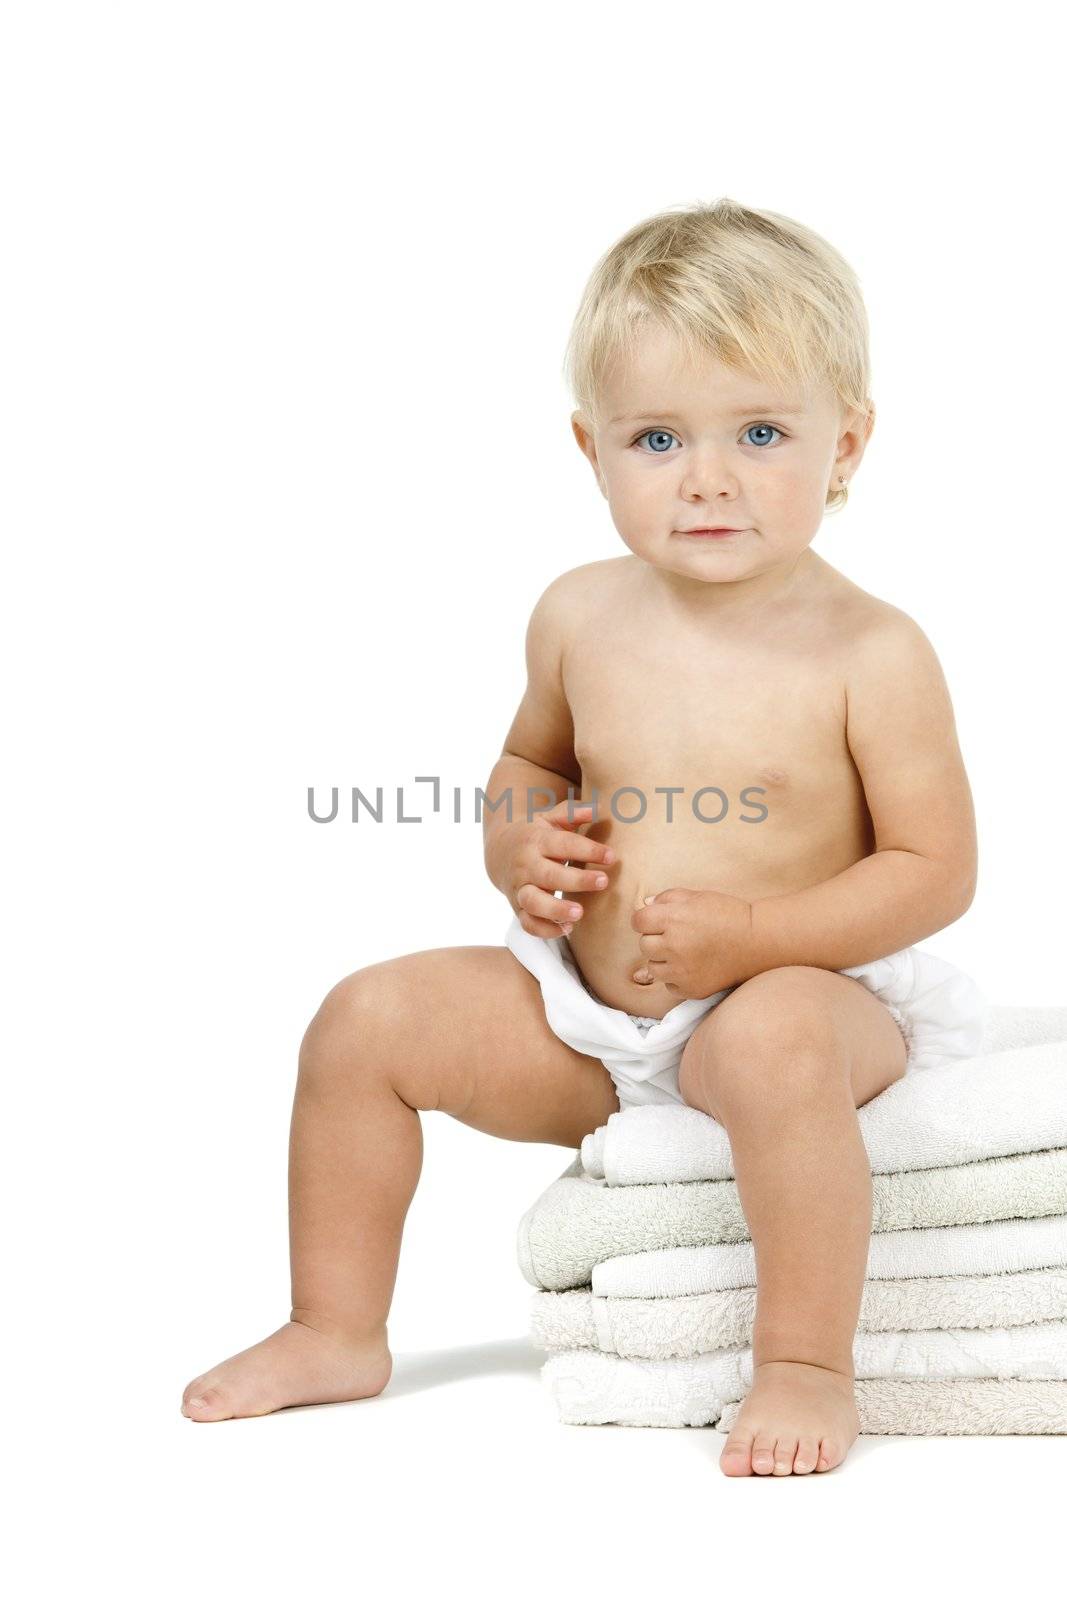 Baby girl sitting on pile of towels by karelnoppe